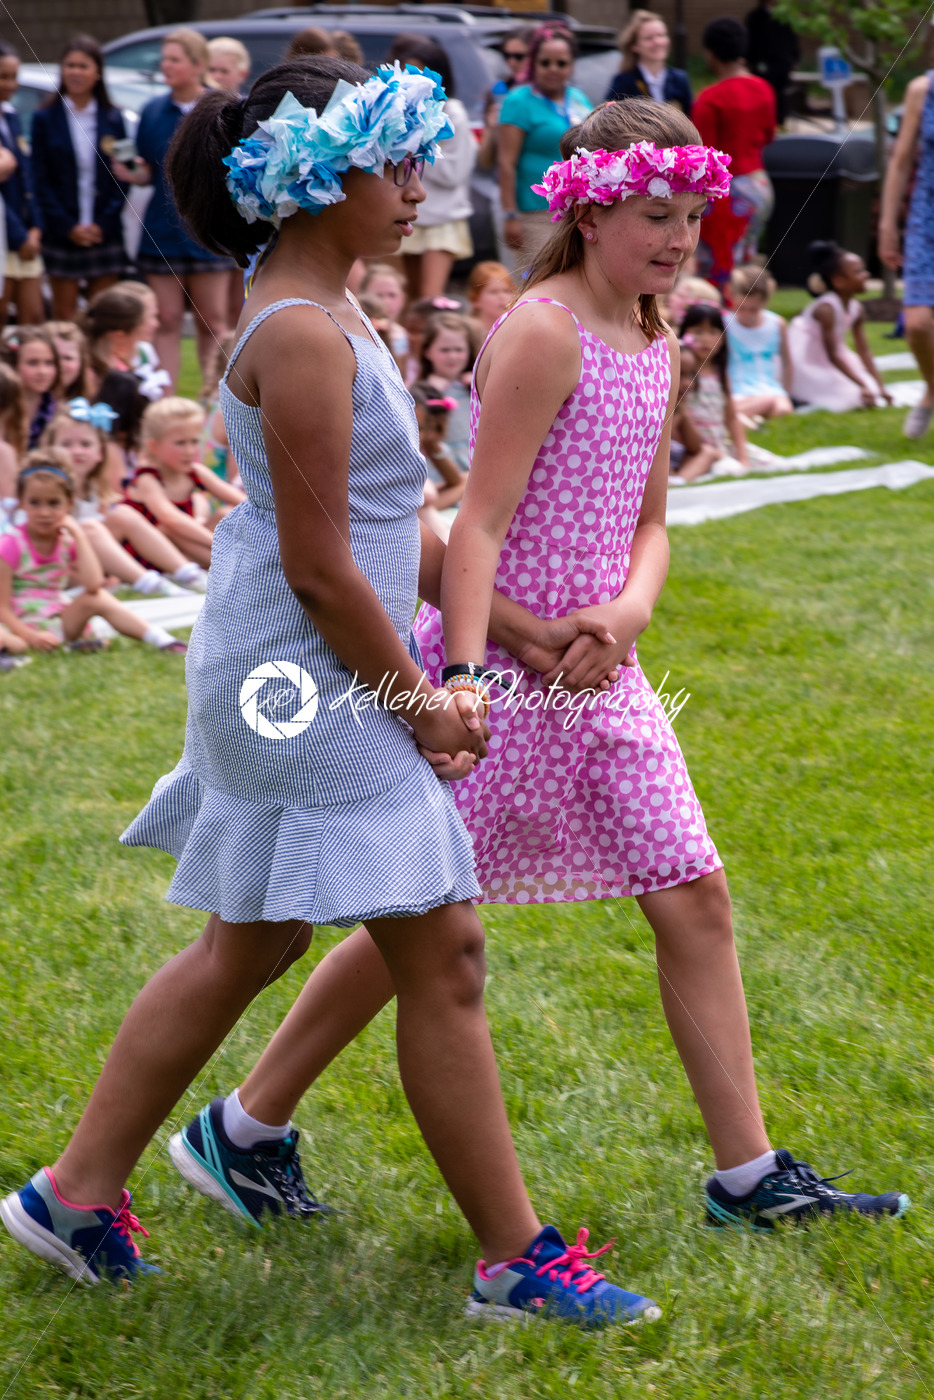 ROSEMONT, PA – MAY 17, 2019: Lower school May fair at The Agnes Irwin School - Kelleher Photography Store